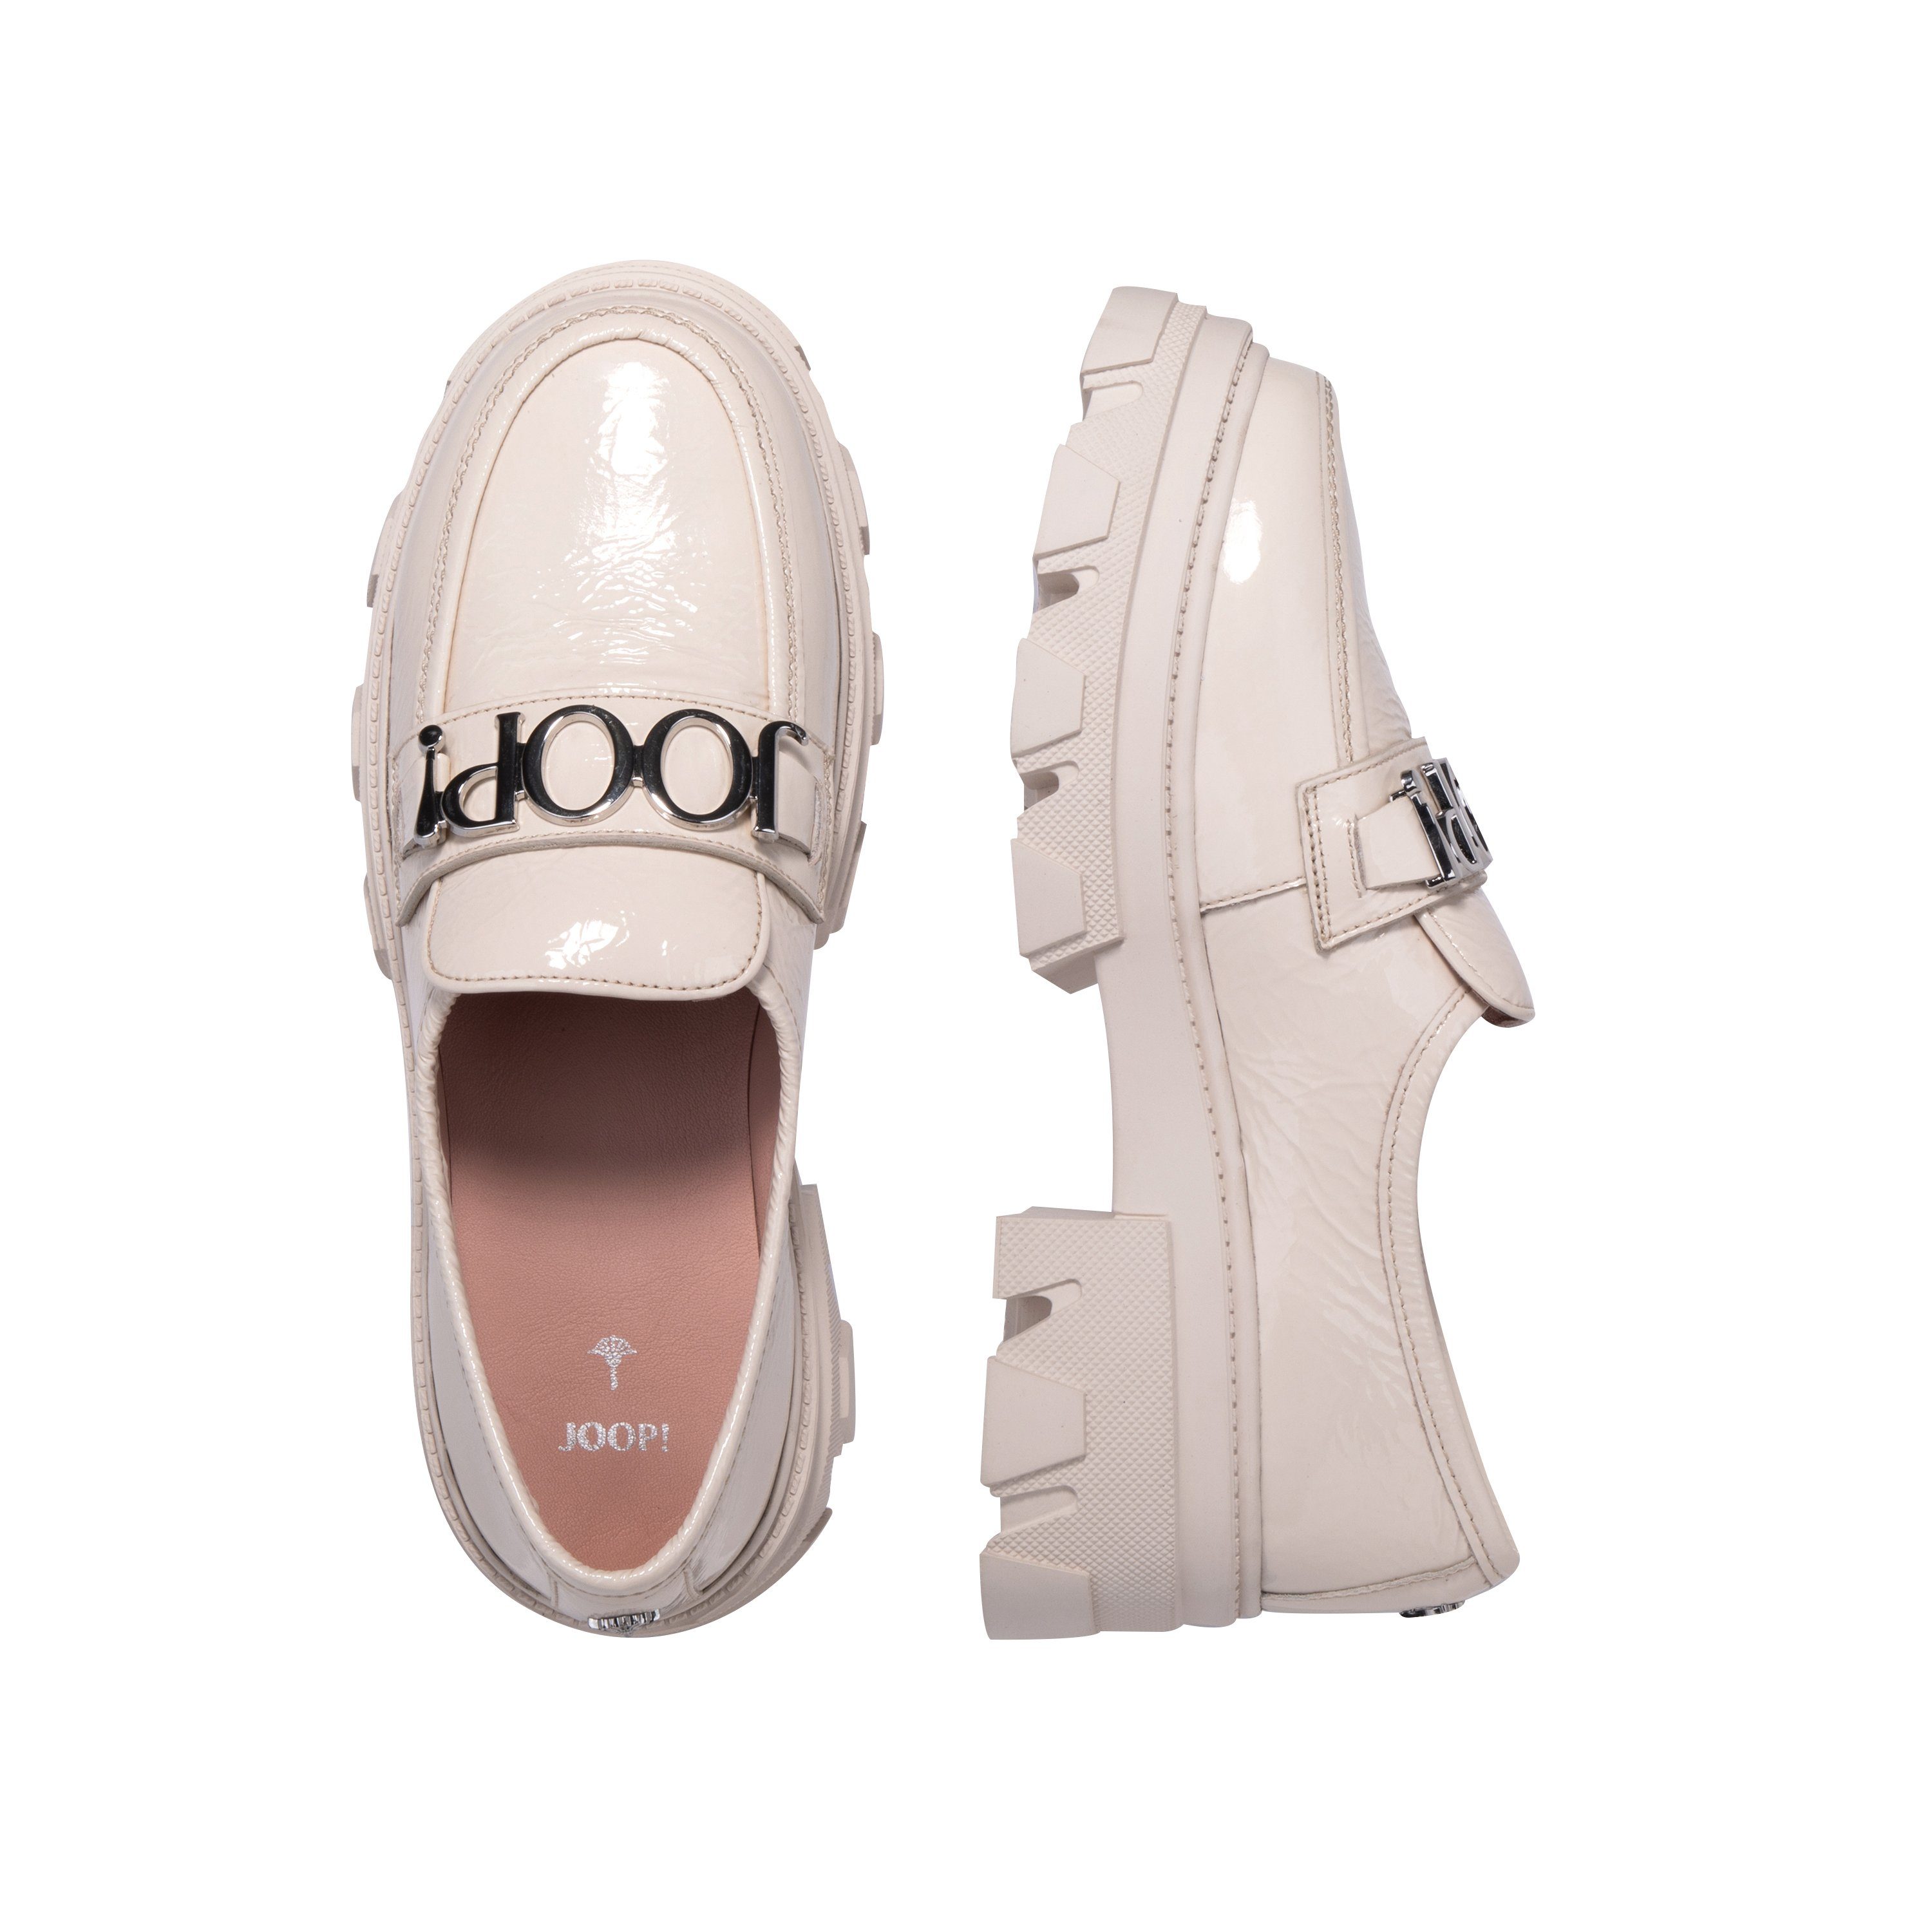 cow leather, inner: Slipper Joop! cow white outer: leather